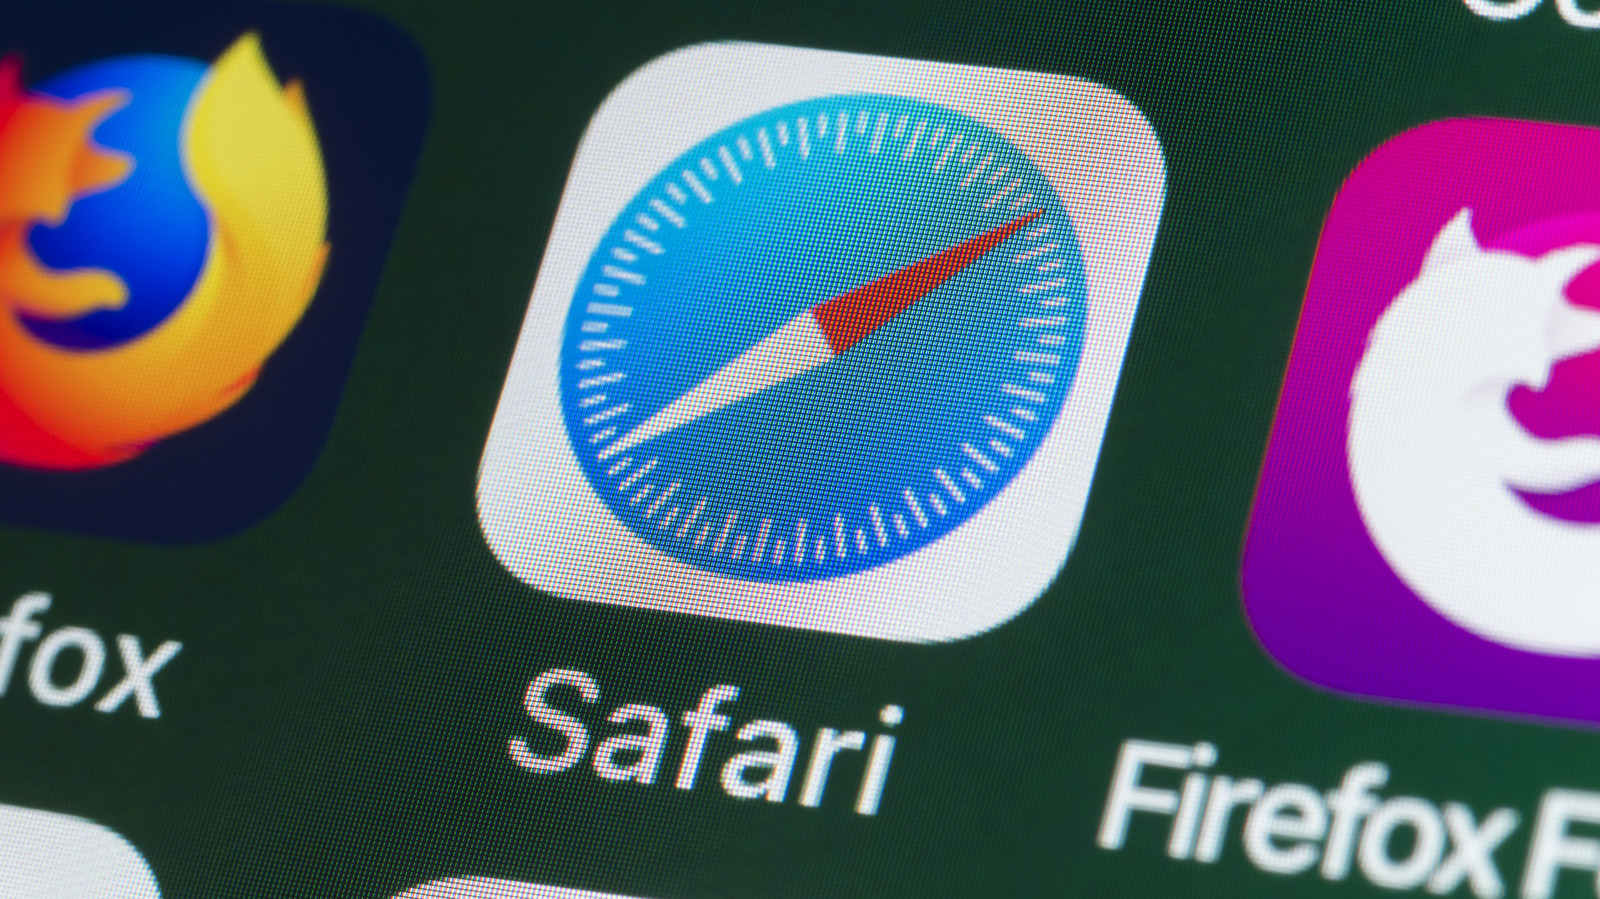 How To Update Safari On Your Mac: A Step-By-Step Guide